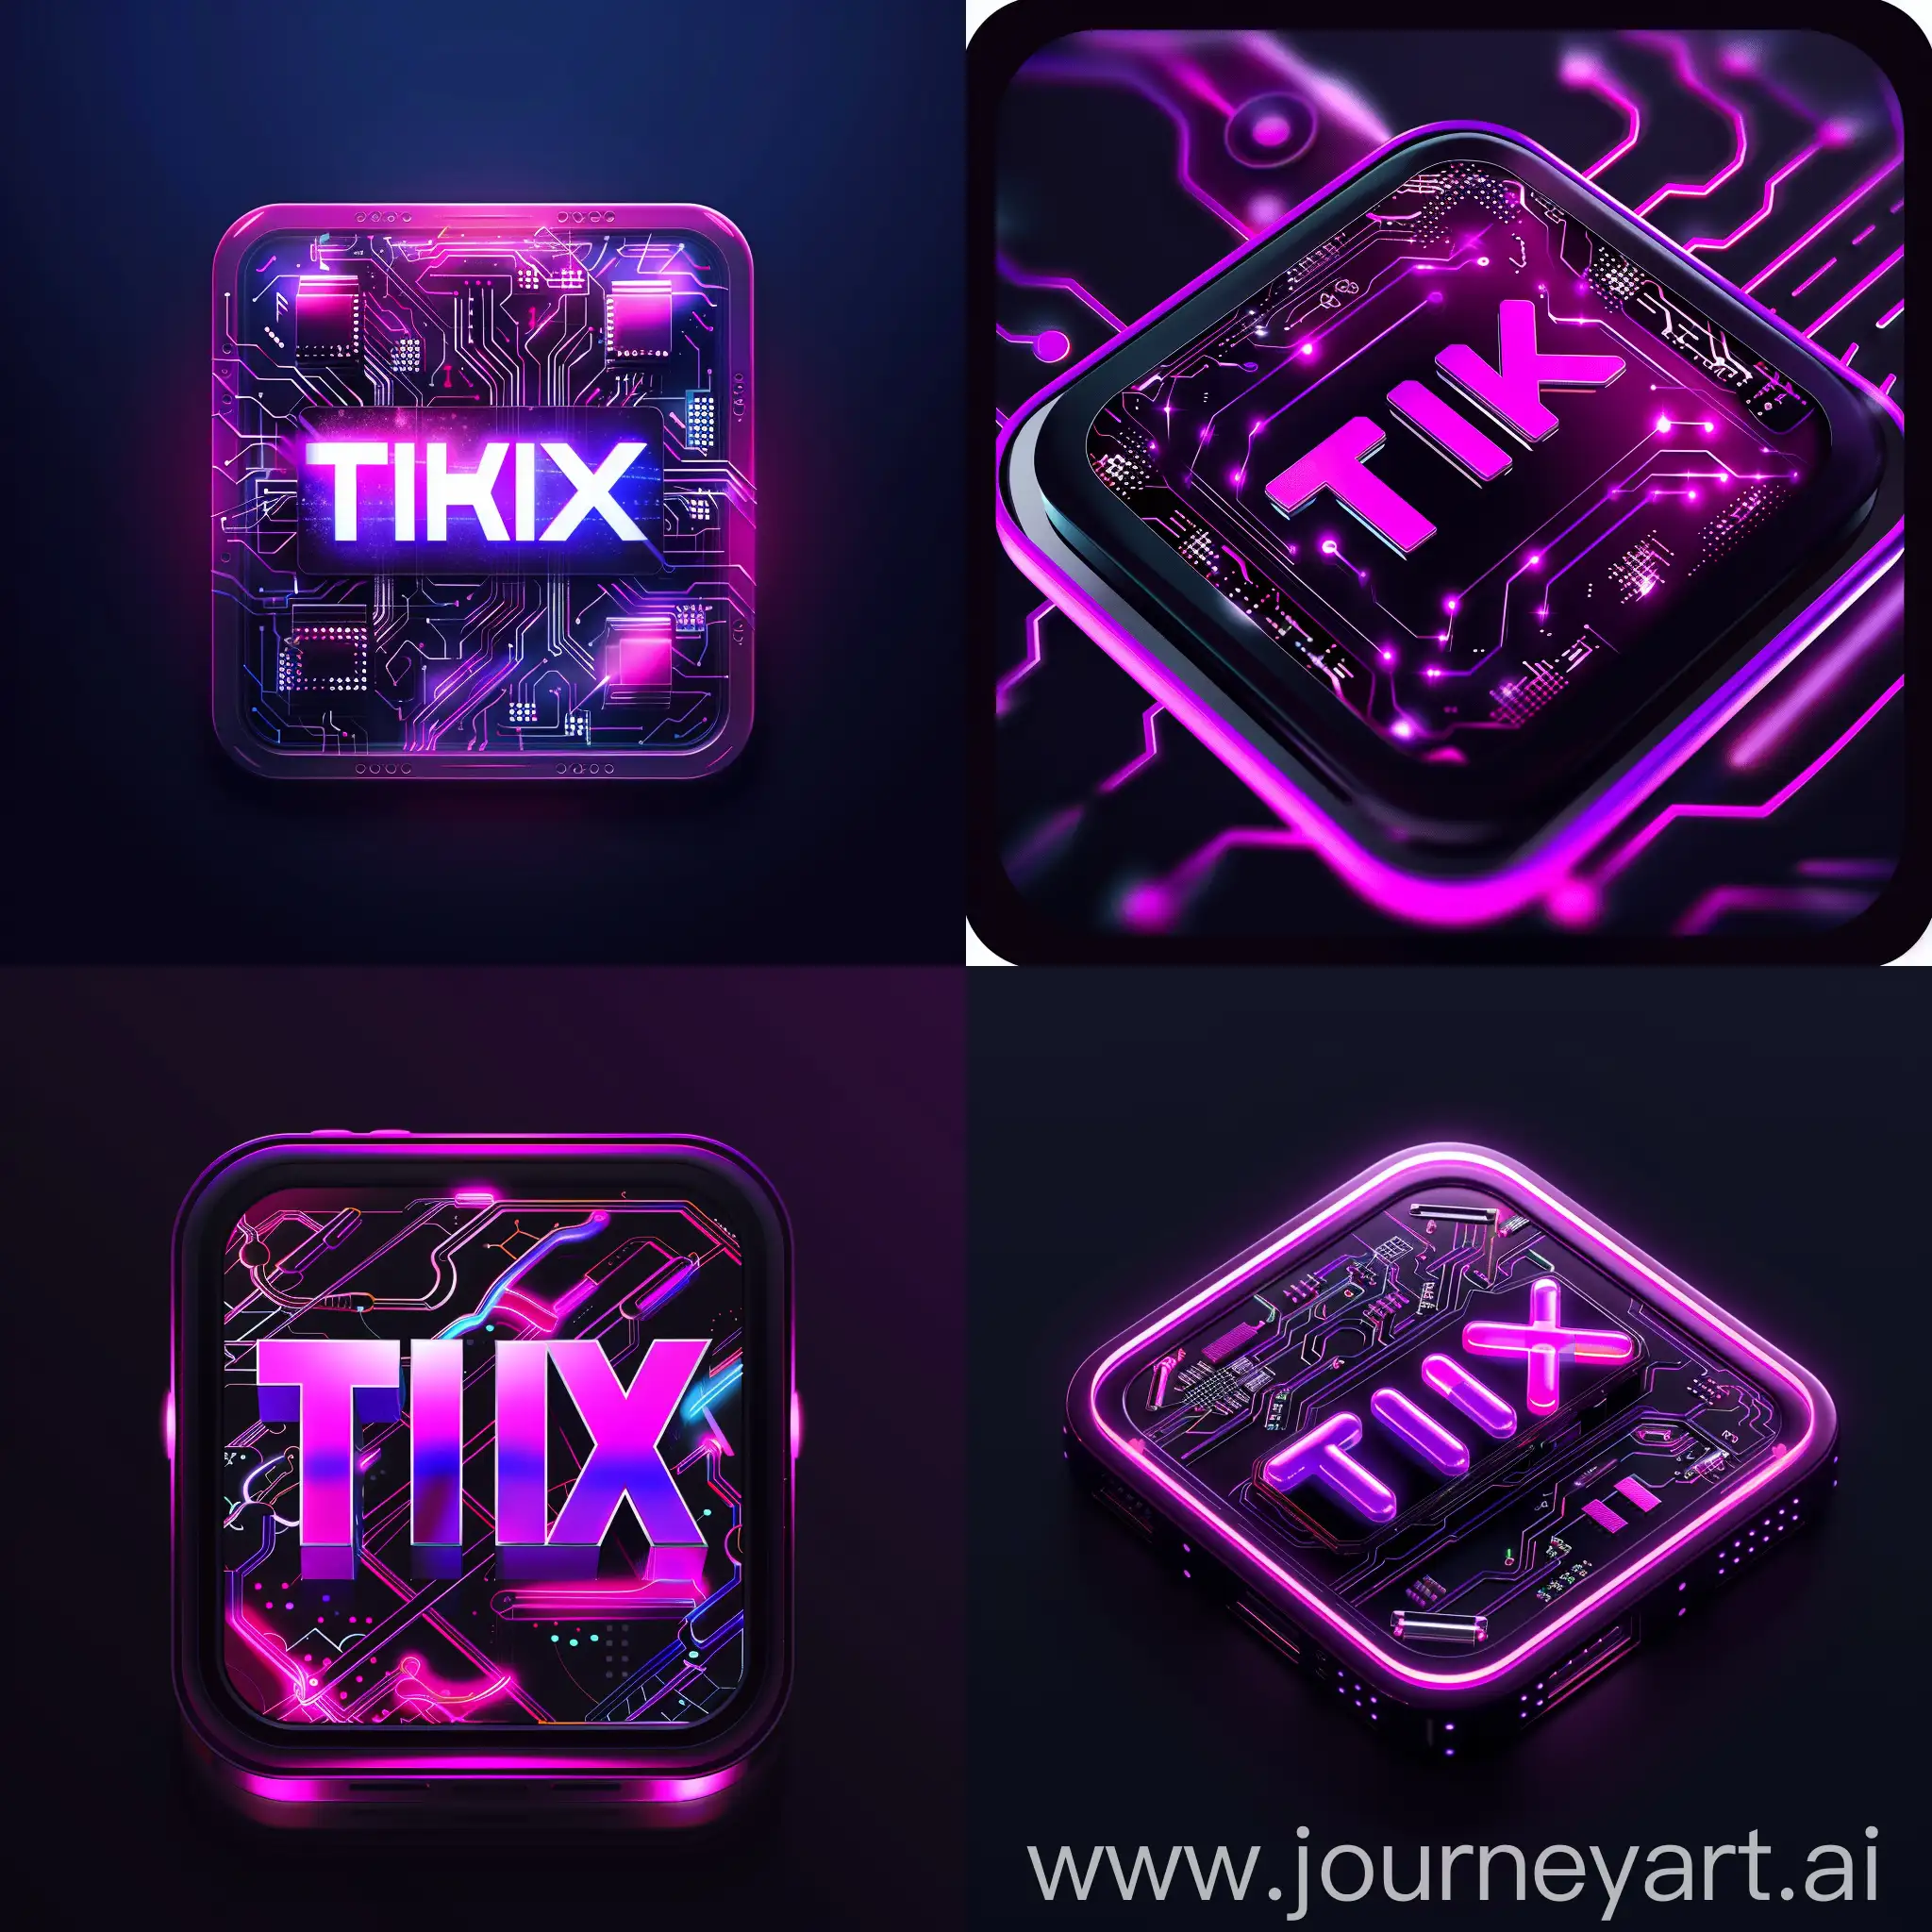 create an icon for the mobile app. The name of the Twix application. With a theme: cyberpunk. Dark background, purple-pink colors. In the middle is the name "Twix", it is located on a square-shaped substrate with rounded edges, the substrate is decorated in the style of a neural network like a web